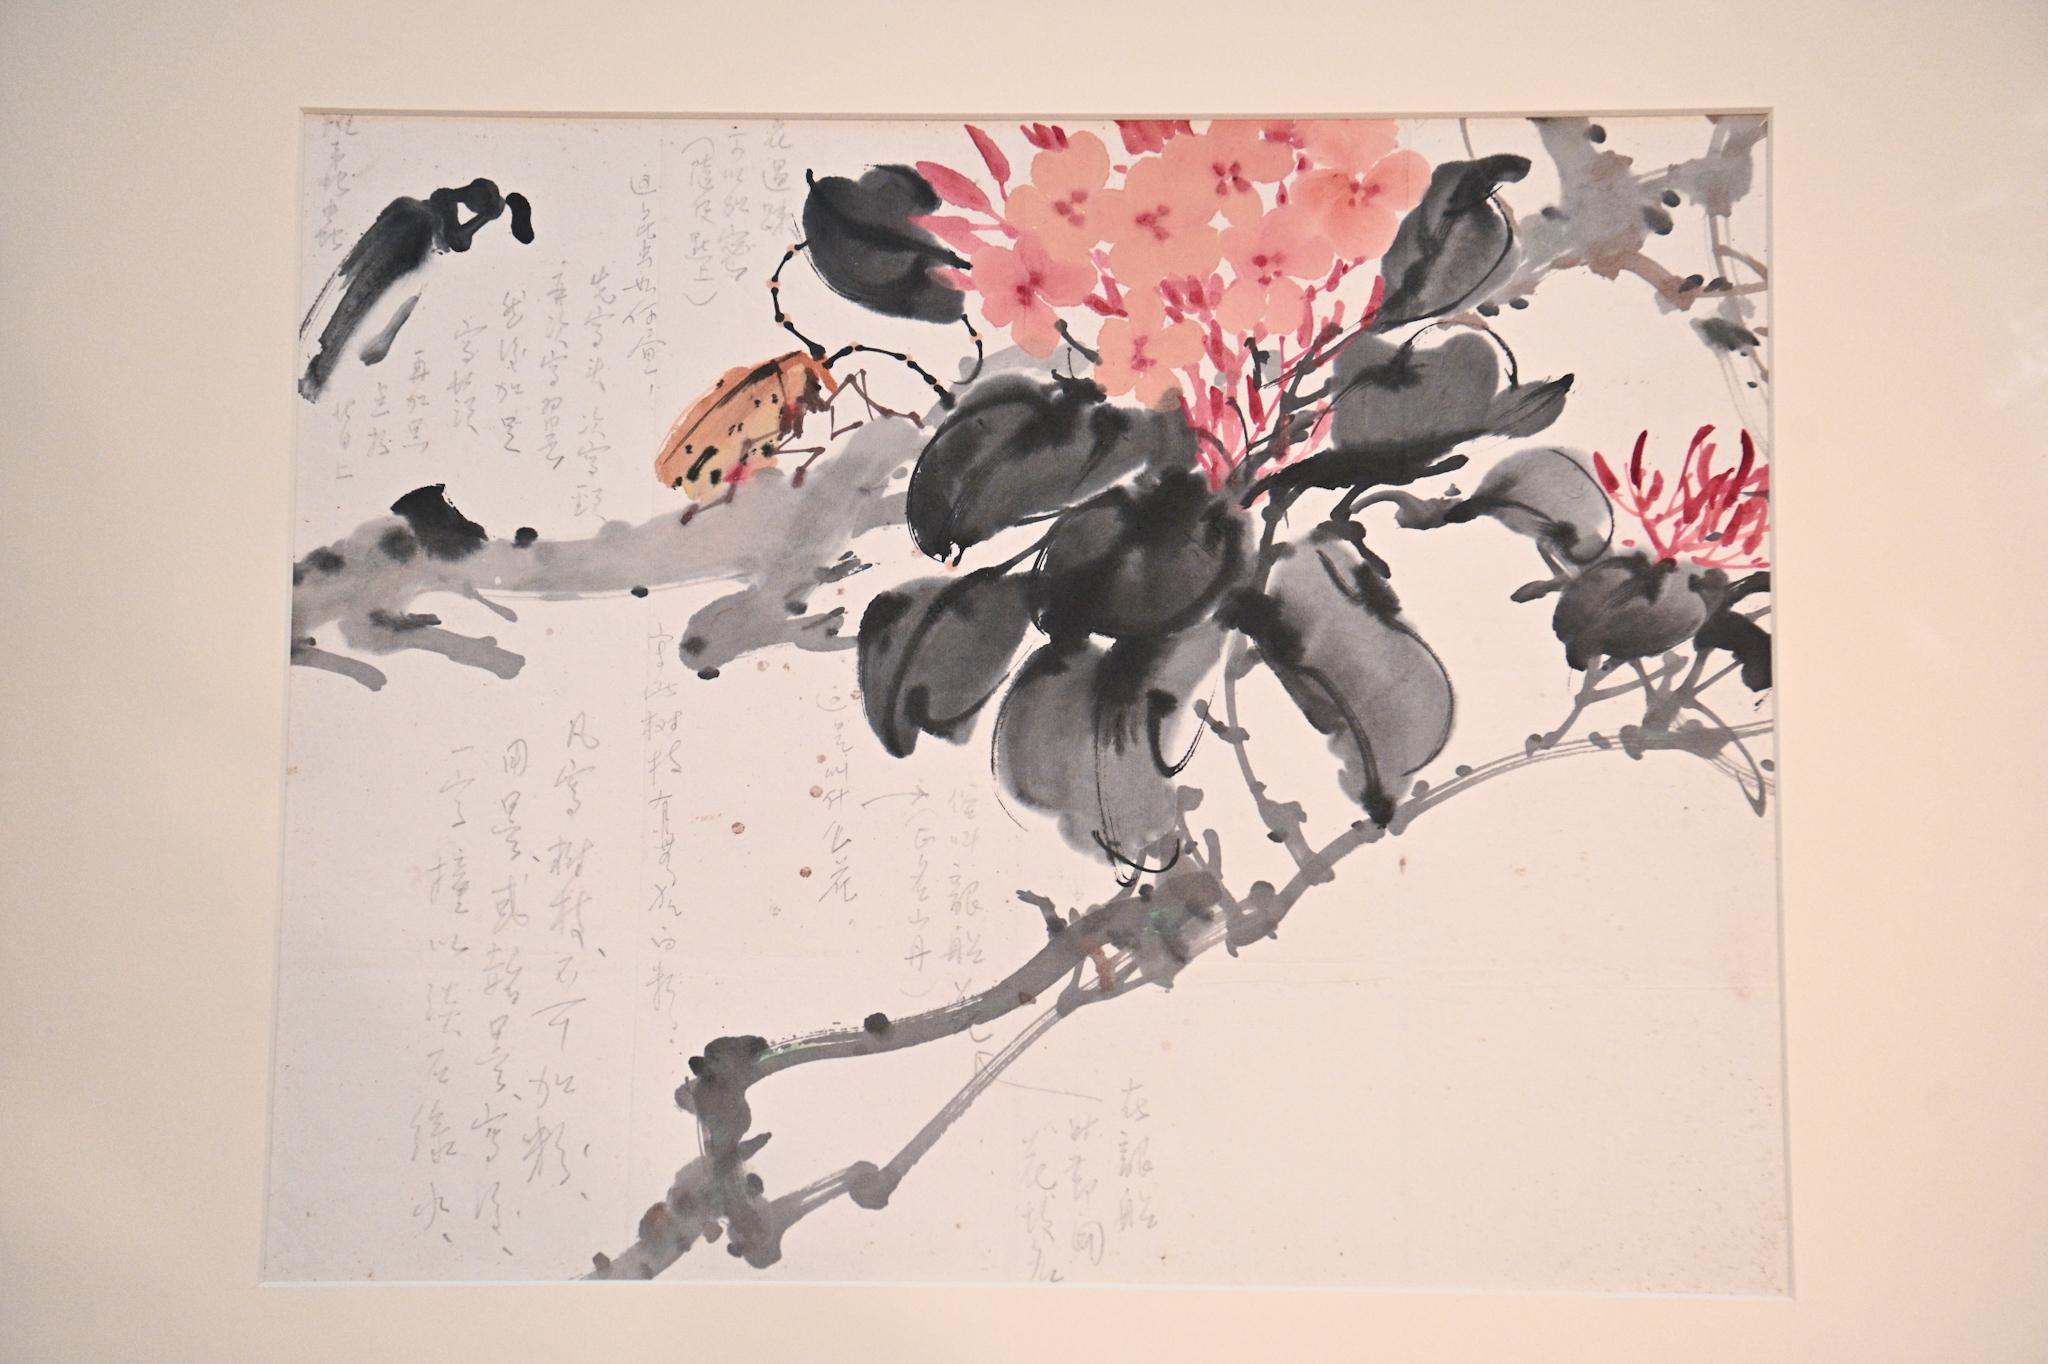 The exhibition "From a Distance: Art Dialogues between Chao Shao-an and Chin Kee" will be open to the public from tomorrow (September 21) at the Hong Kong Heritage Museum. Picture shows Chin Kee's painting assignment "Ixora", with questions and answers between Chao Shao-an and Chin.